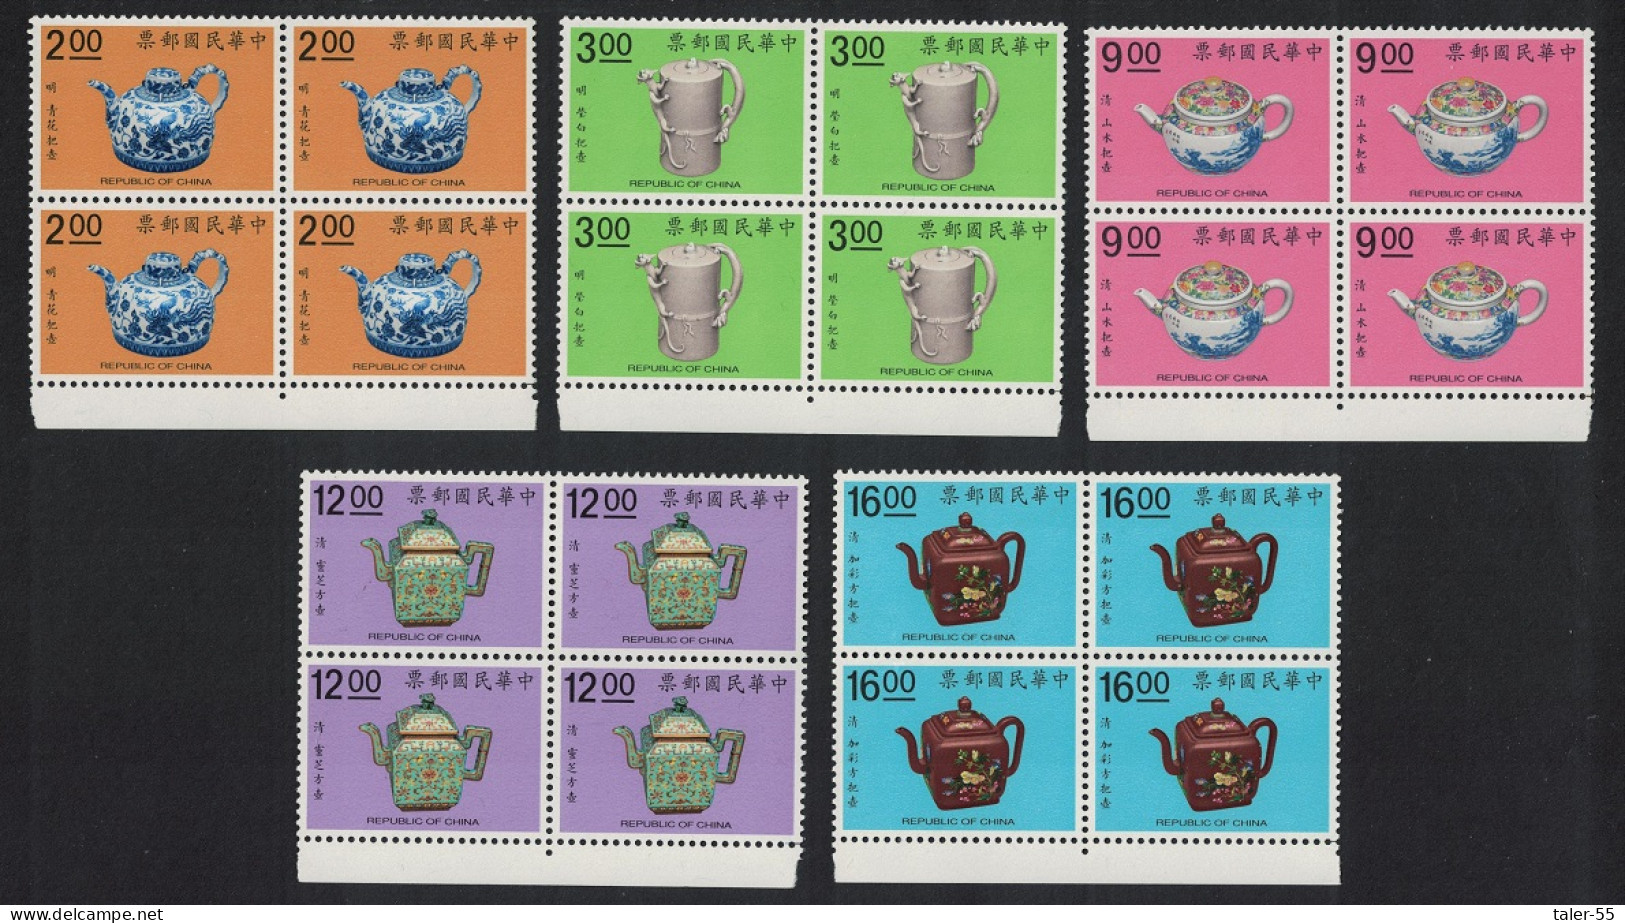 Taiwan Teapots 2nd Series 5v Blocks Of 4 1991 MNH SG#1946-1950 - Unused Stamps